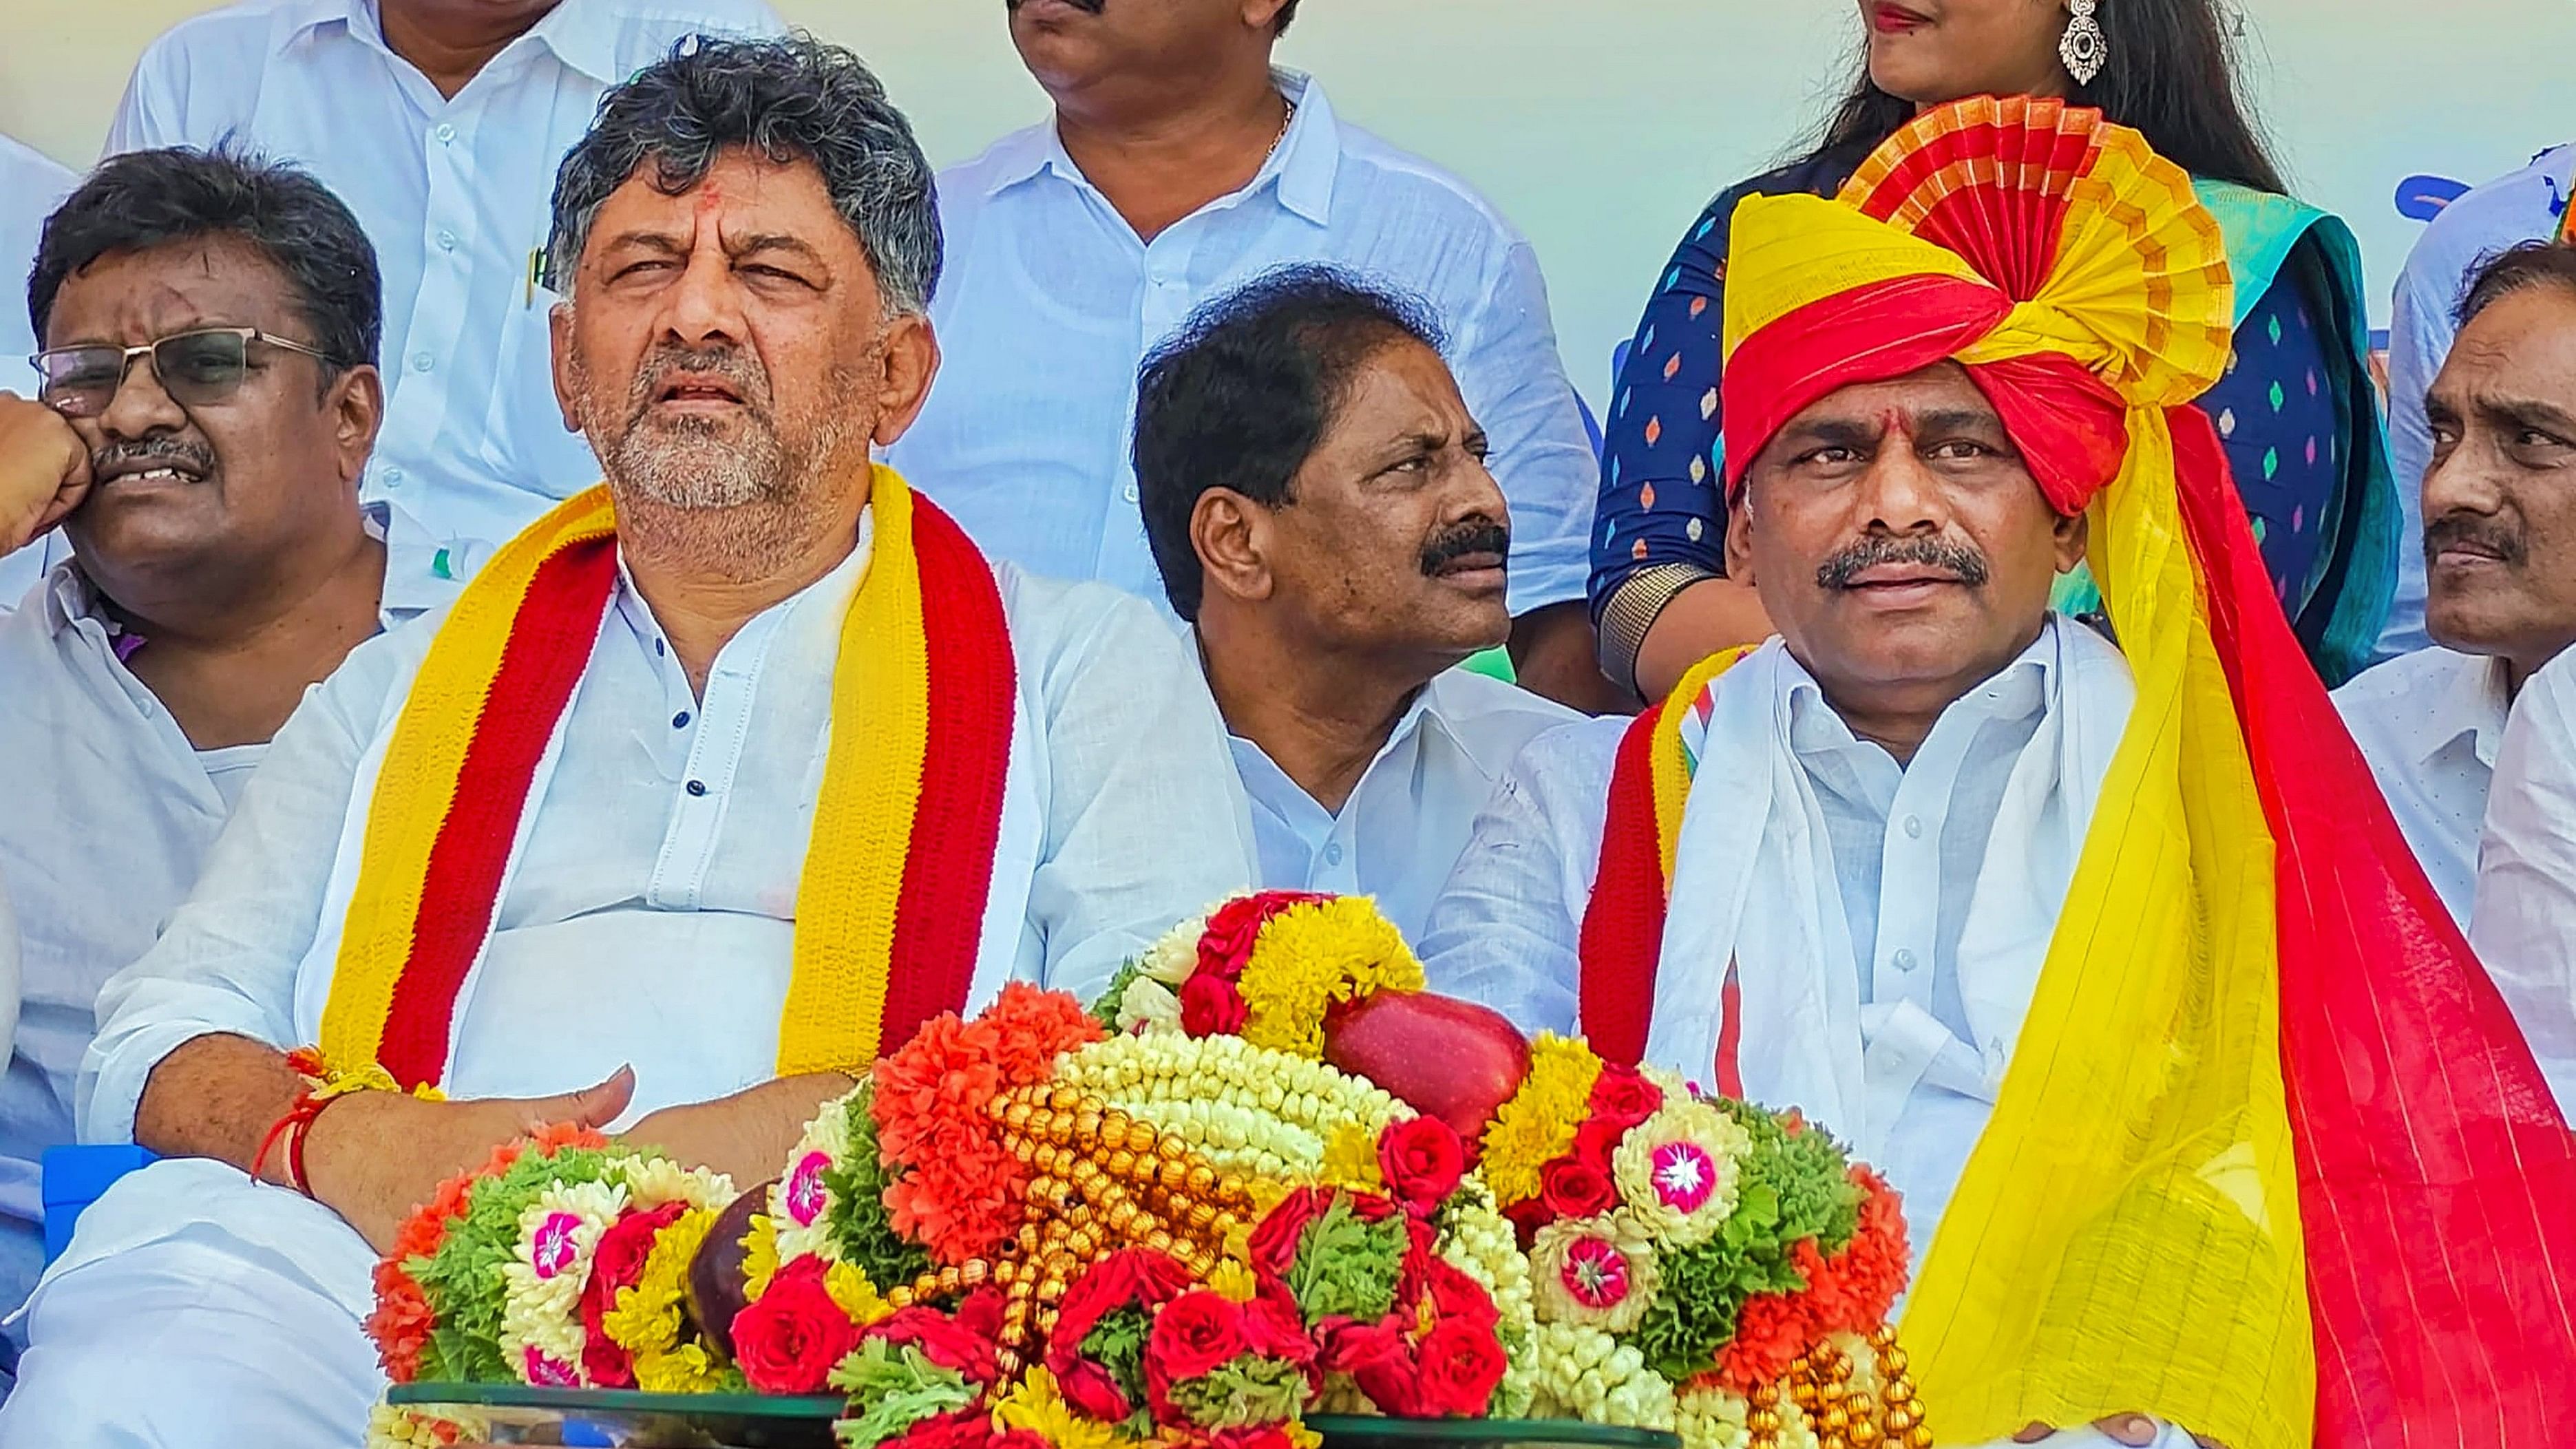 <div class="paragraphs"><p>Karnataka Deputy Chief Minister D K Shivakumar with Congress candidate from Bangalore Rural constituency D K Suresh during an election rally ahead of upcoming Lok Sabha elections.</p></div>